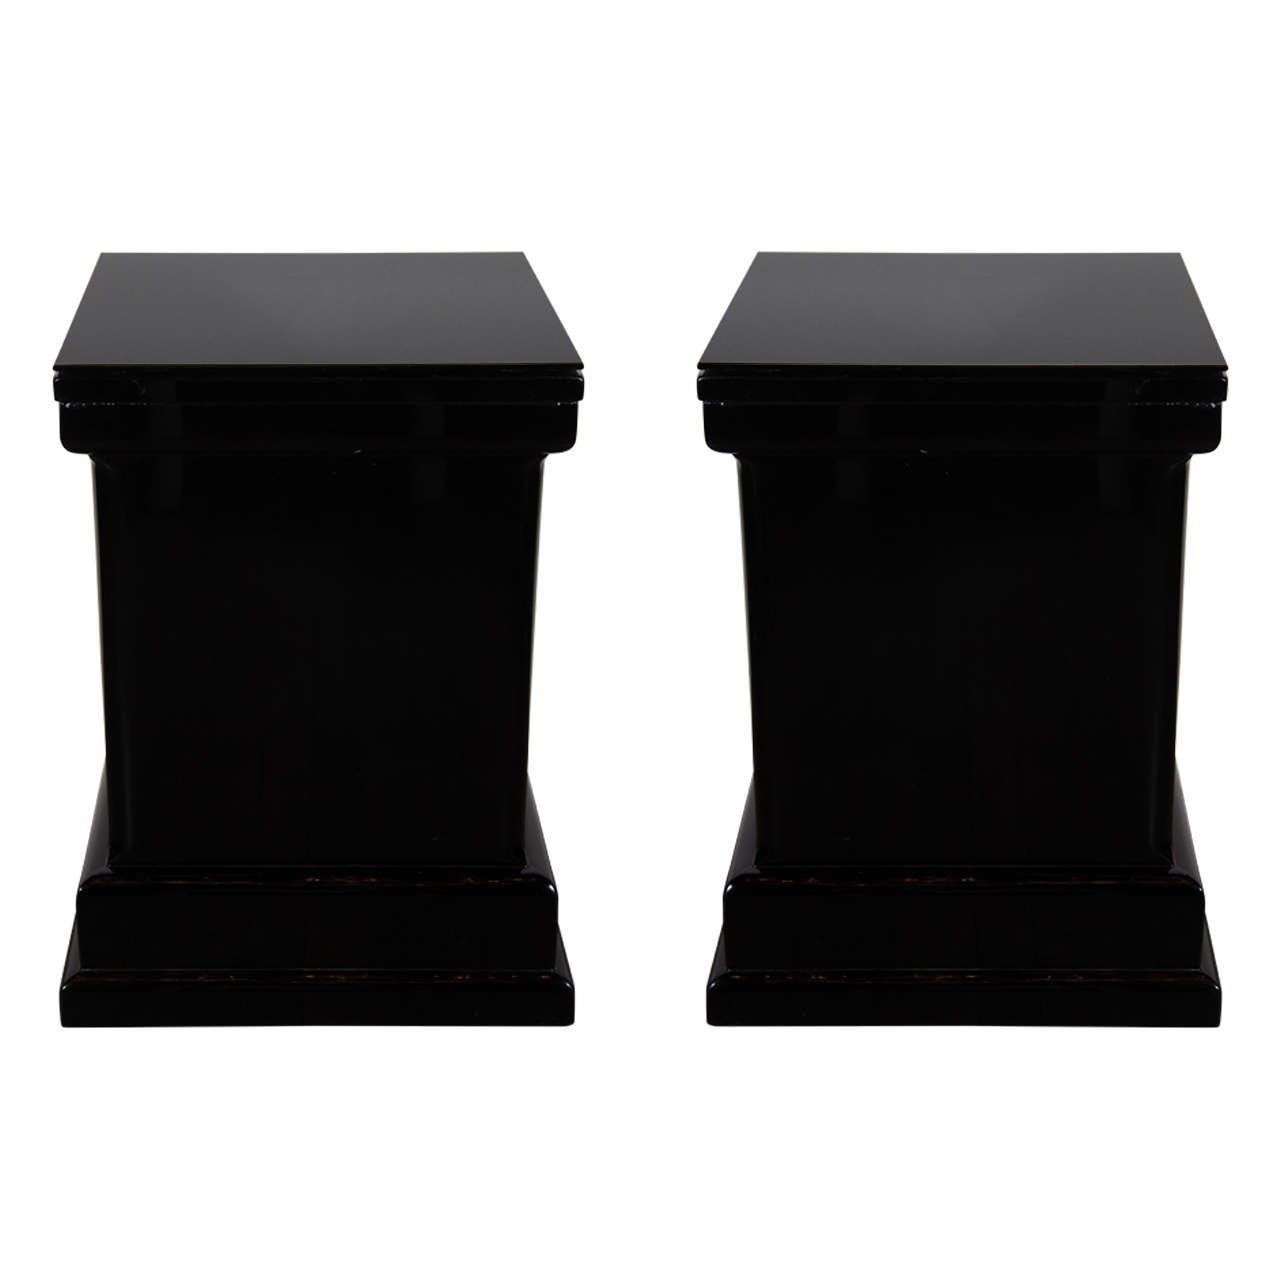 Machine Age Pair of Art Deco Style Skyscaper Pedestal End Tables